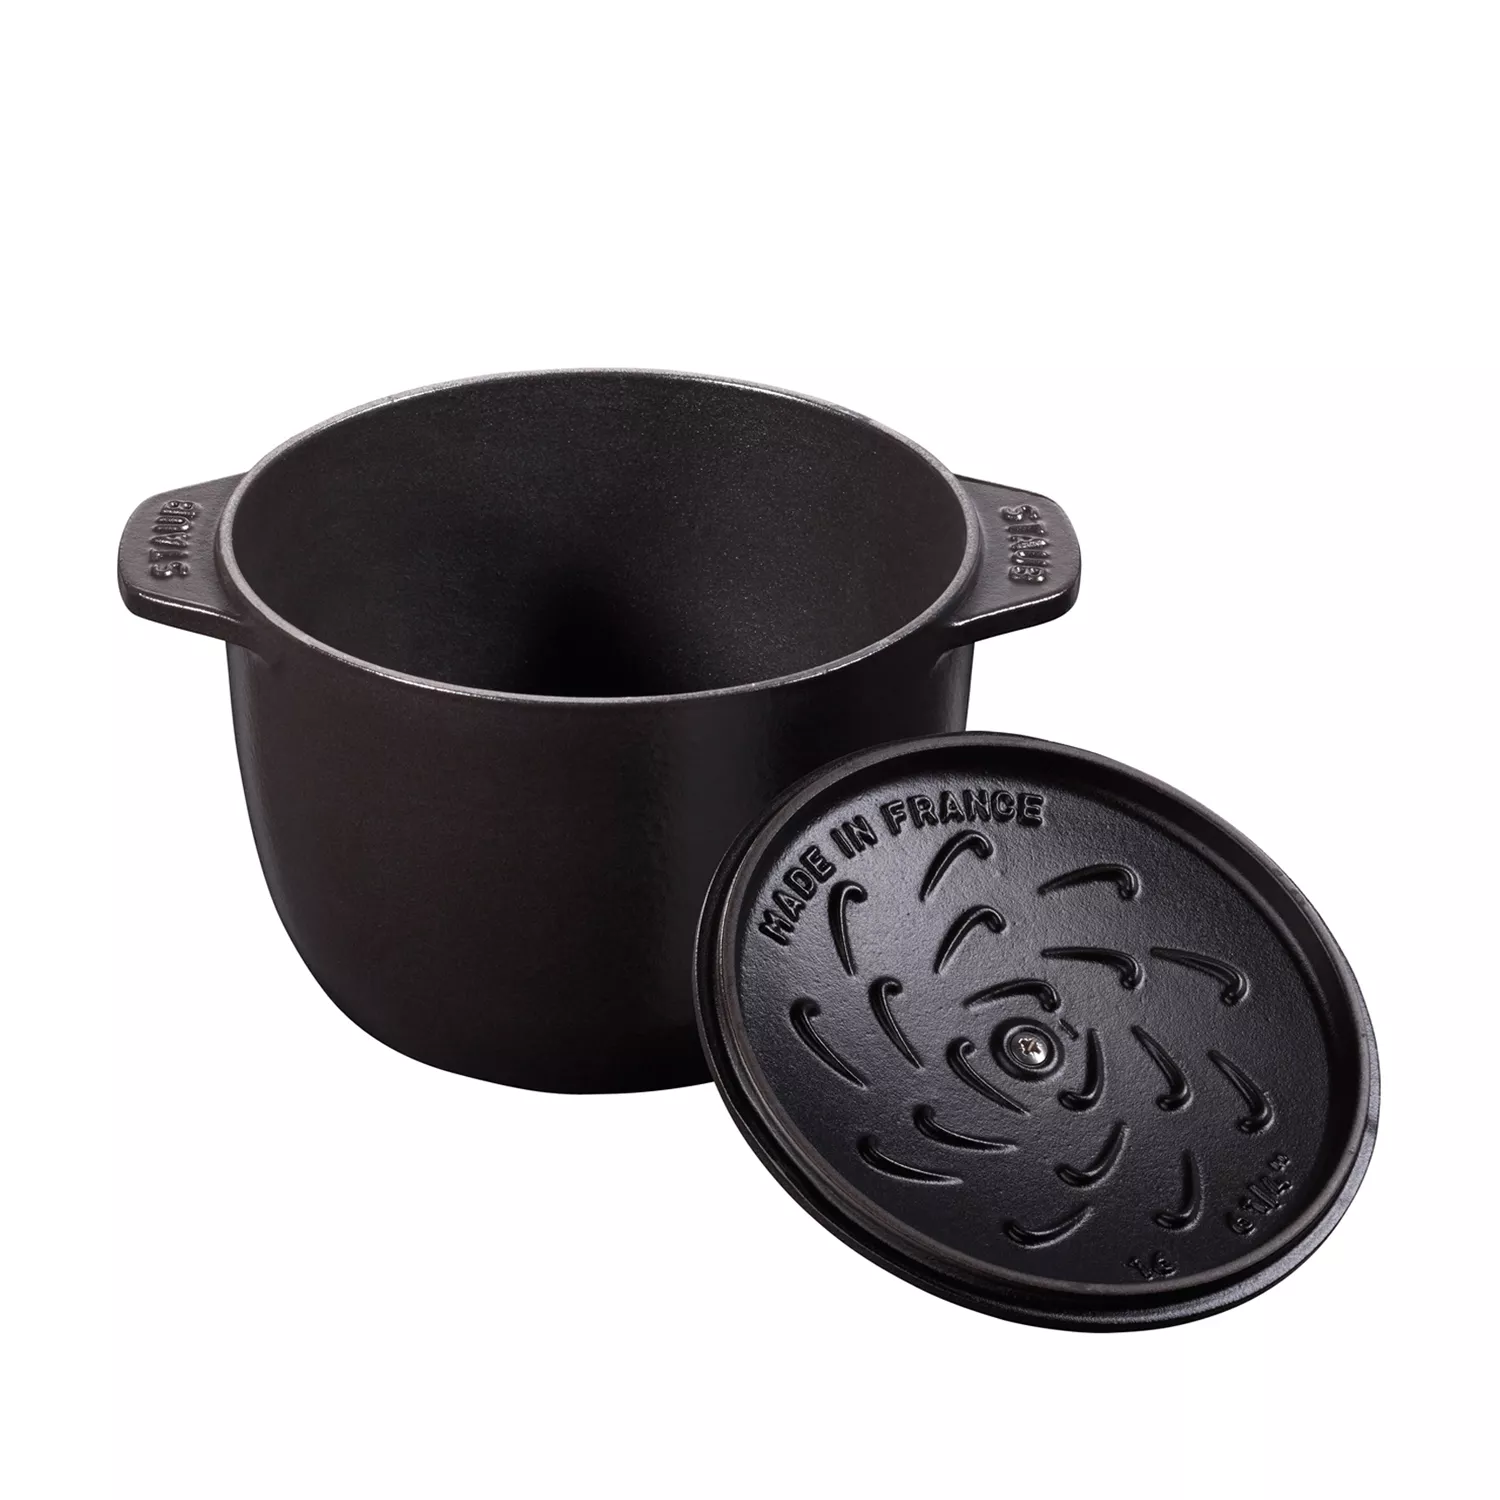 Staub Dutch Ovens Are Up To 75 Percent Off Right Now At Sur La